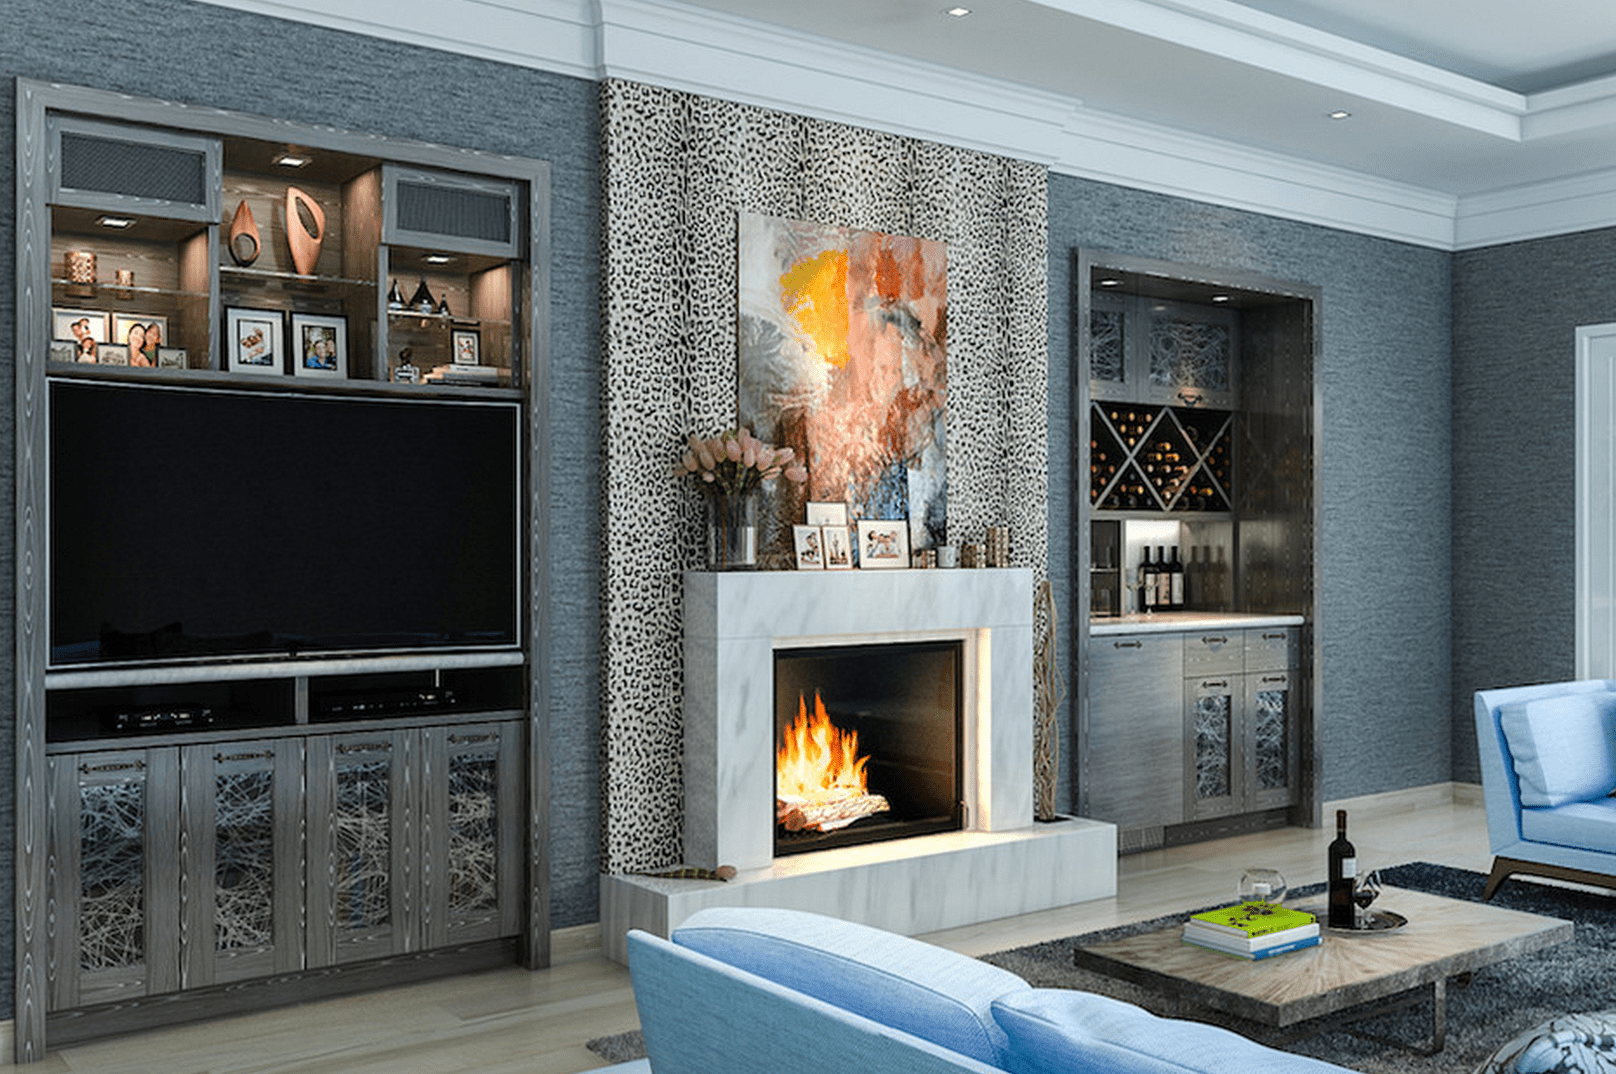 Tv Fireplace Wall Unit Designs Luxury Beautiful Living Rooms with Built In Shelving